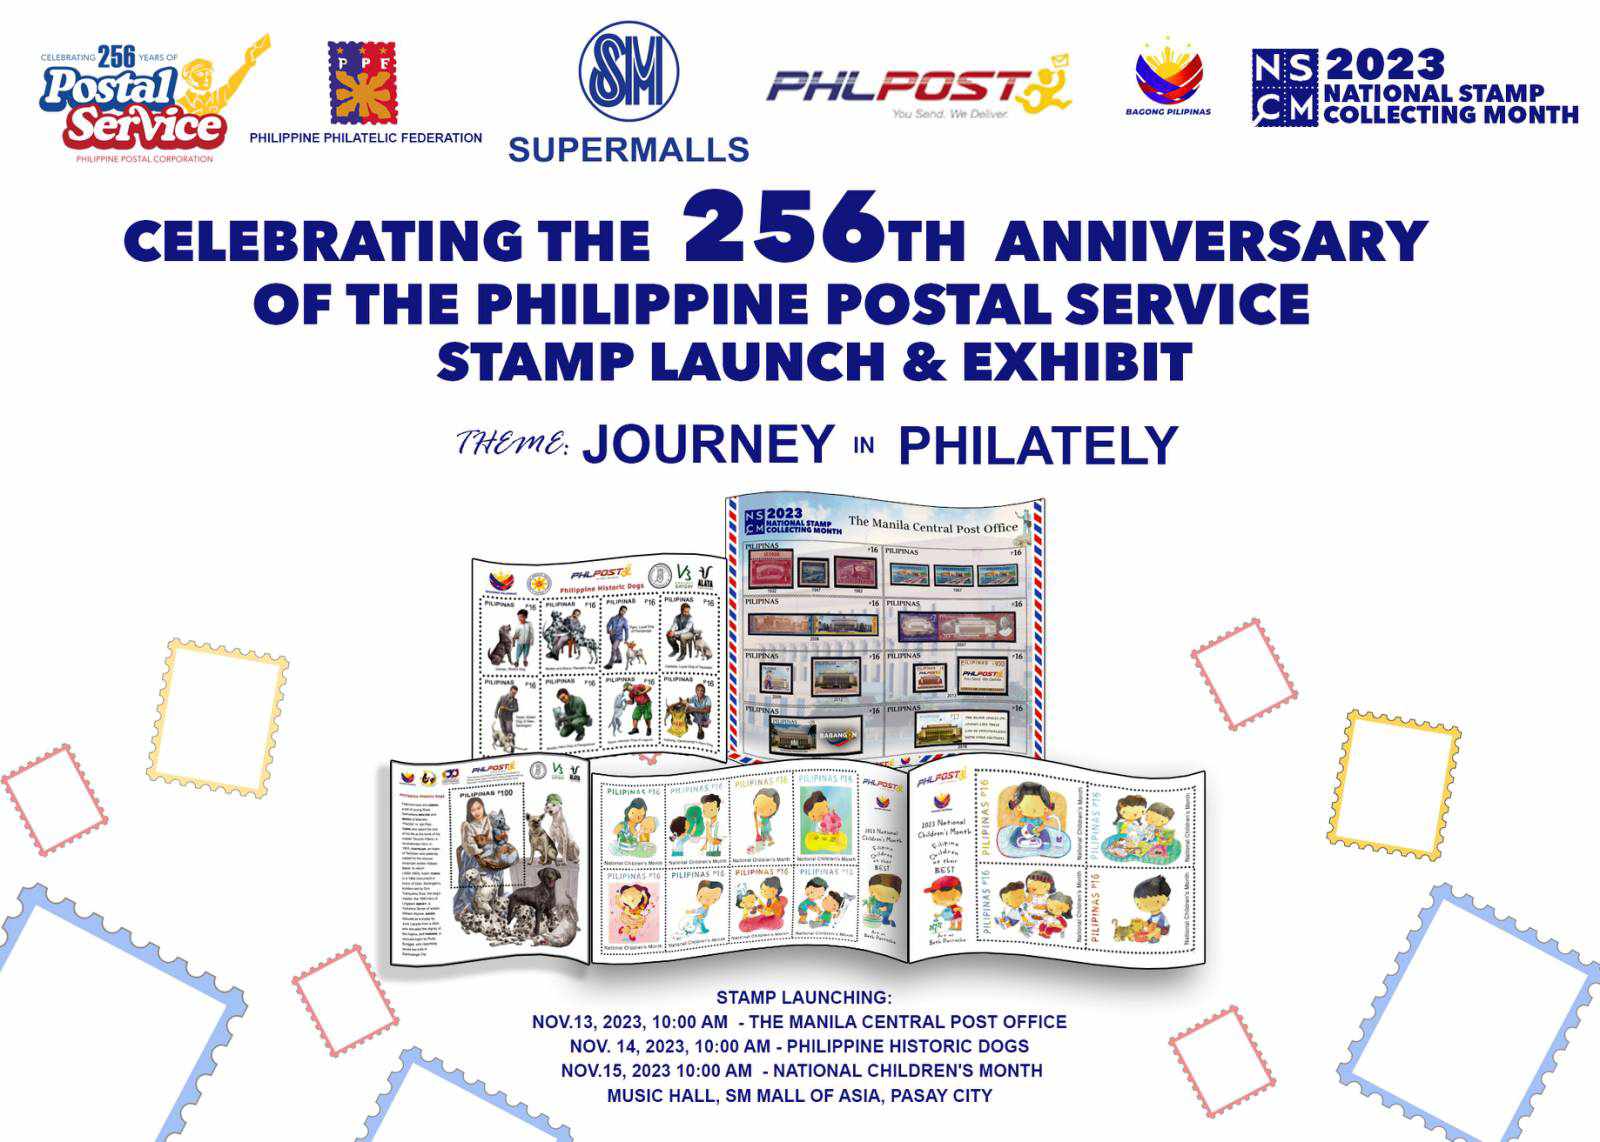 PHLPost launches postage stamps to mark 256th anniversary and National Stamp Collecting Month